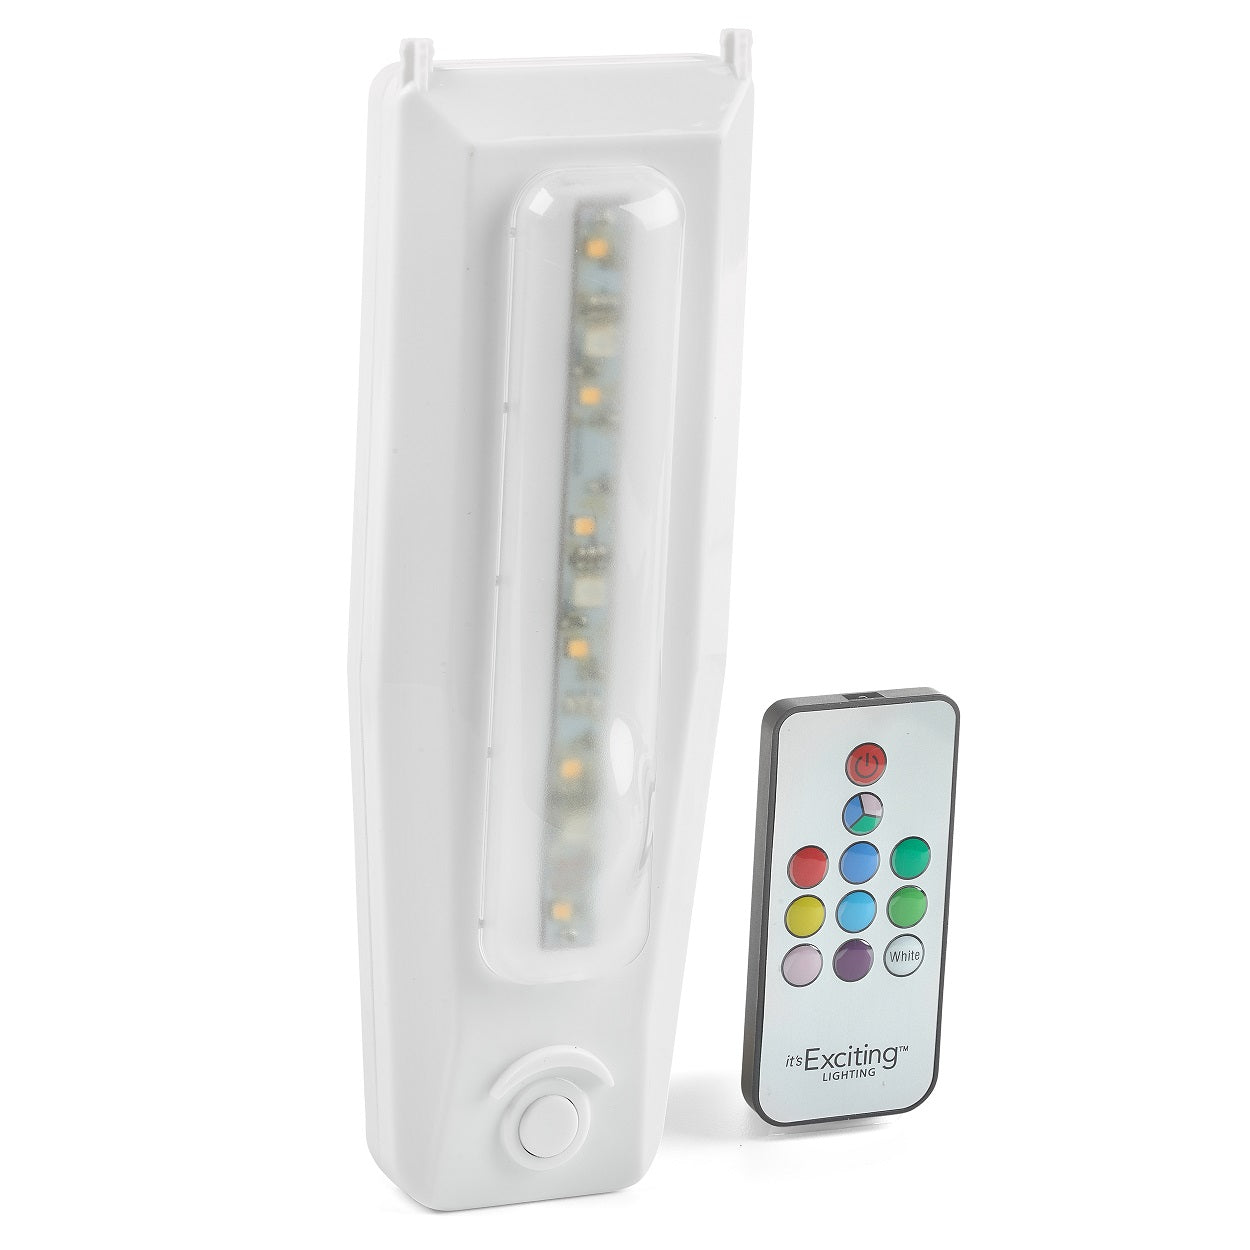 Vertical LED Backplate for Sconce Lights (White/Color modes with Remote Included)